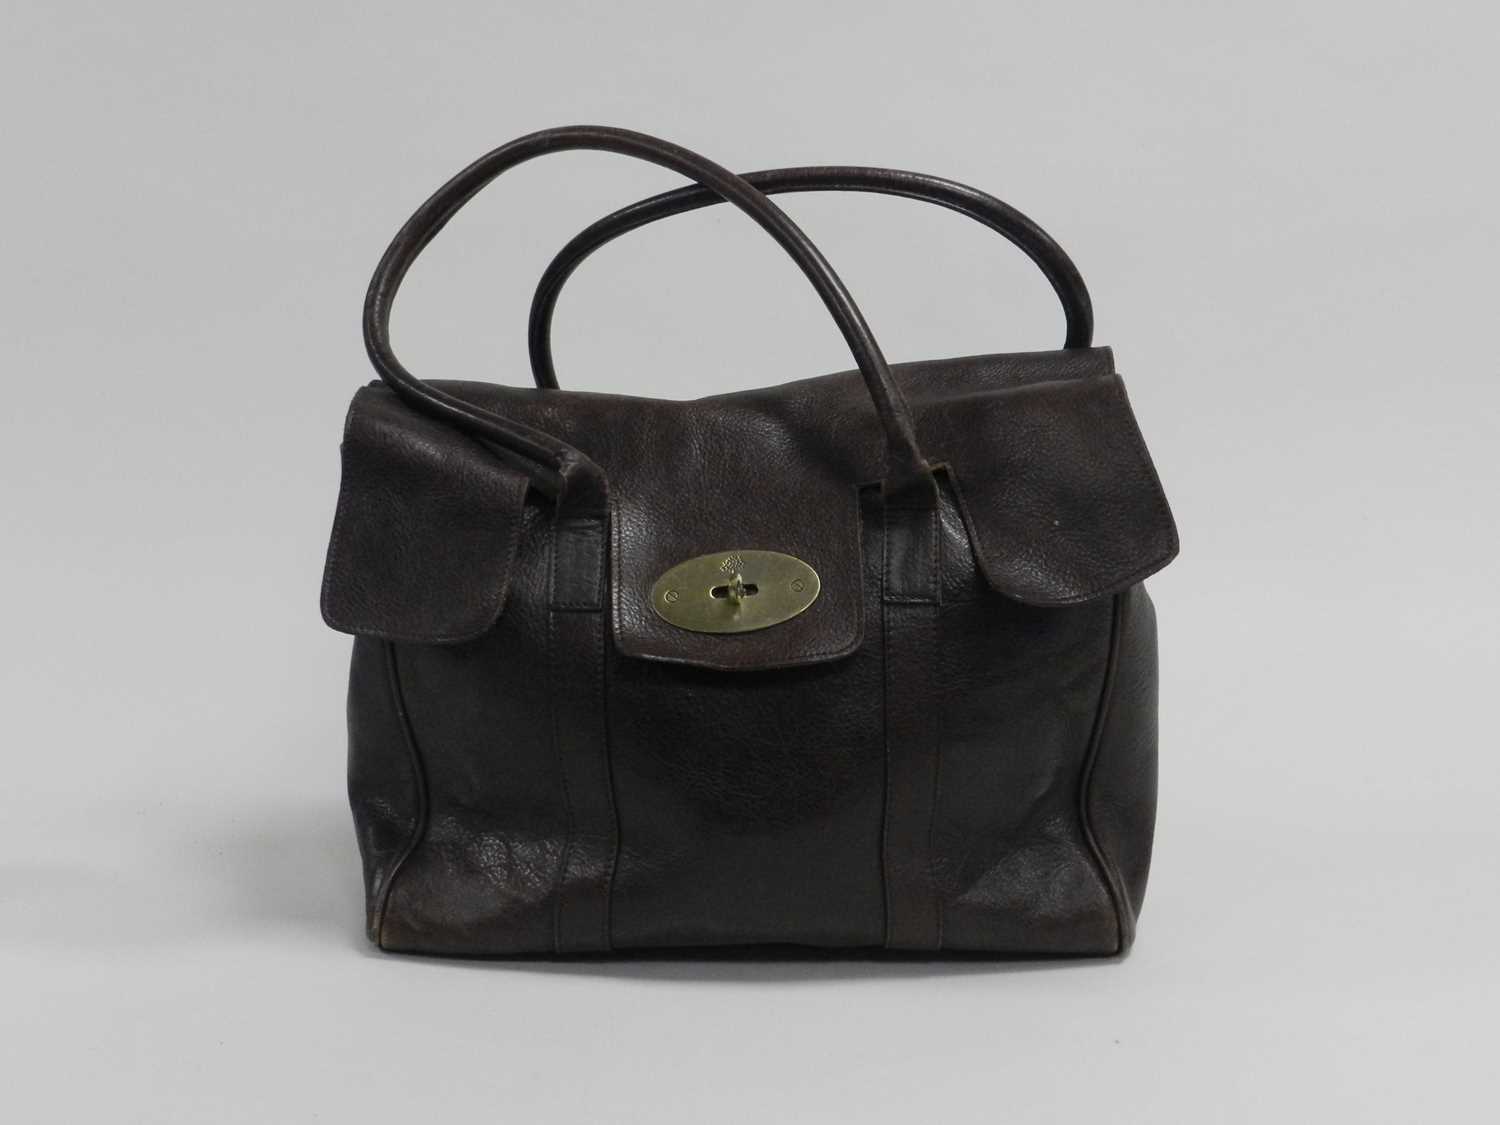 A recent vintage Mulberry leather handbag, of tote type with strap handles and brass clasp, 28cm x